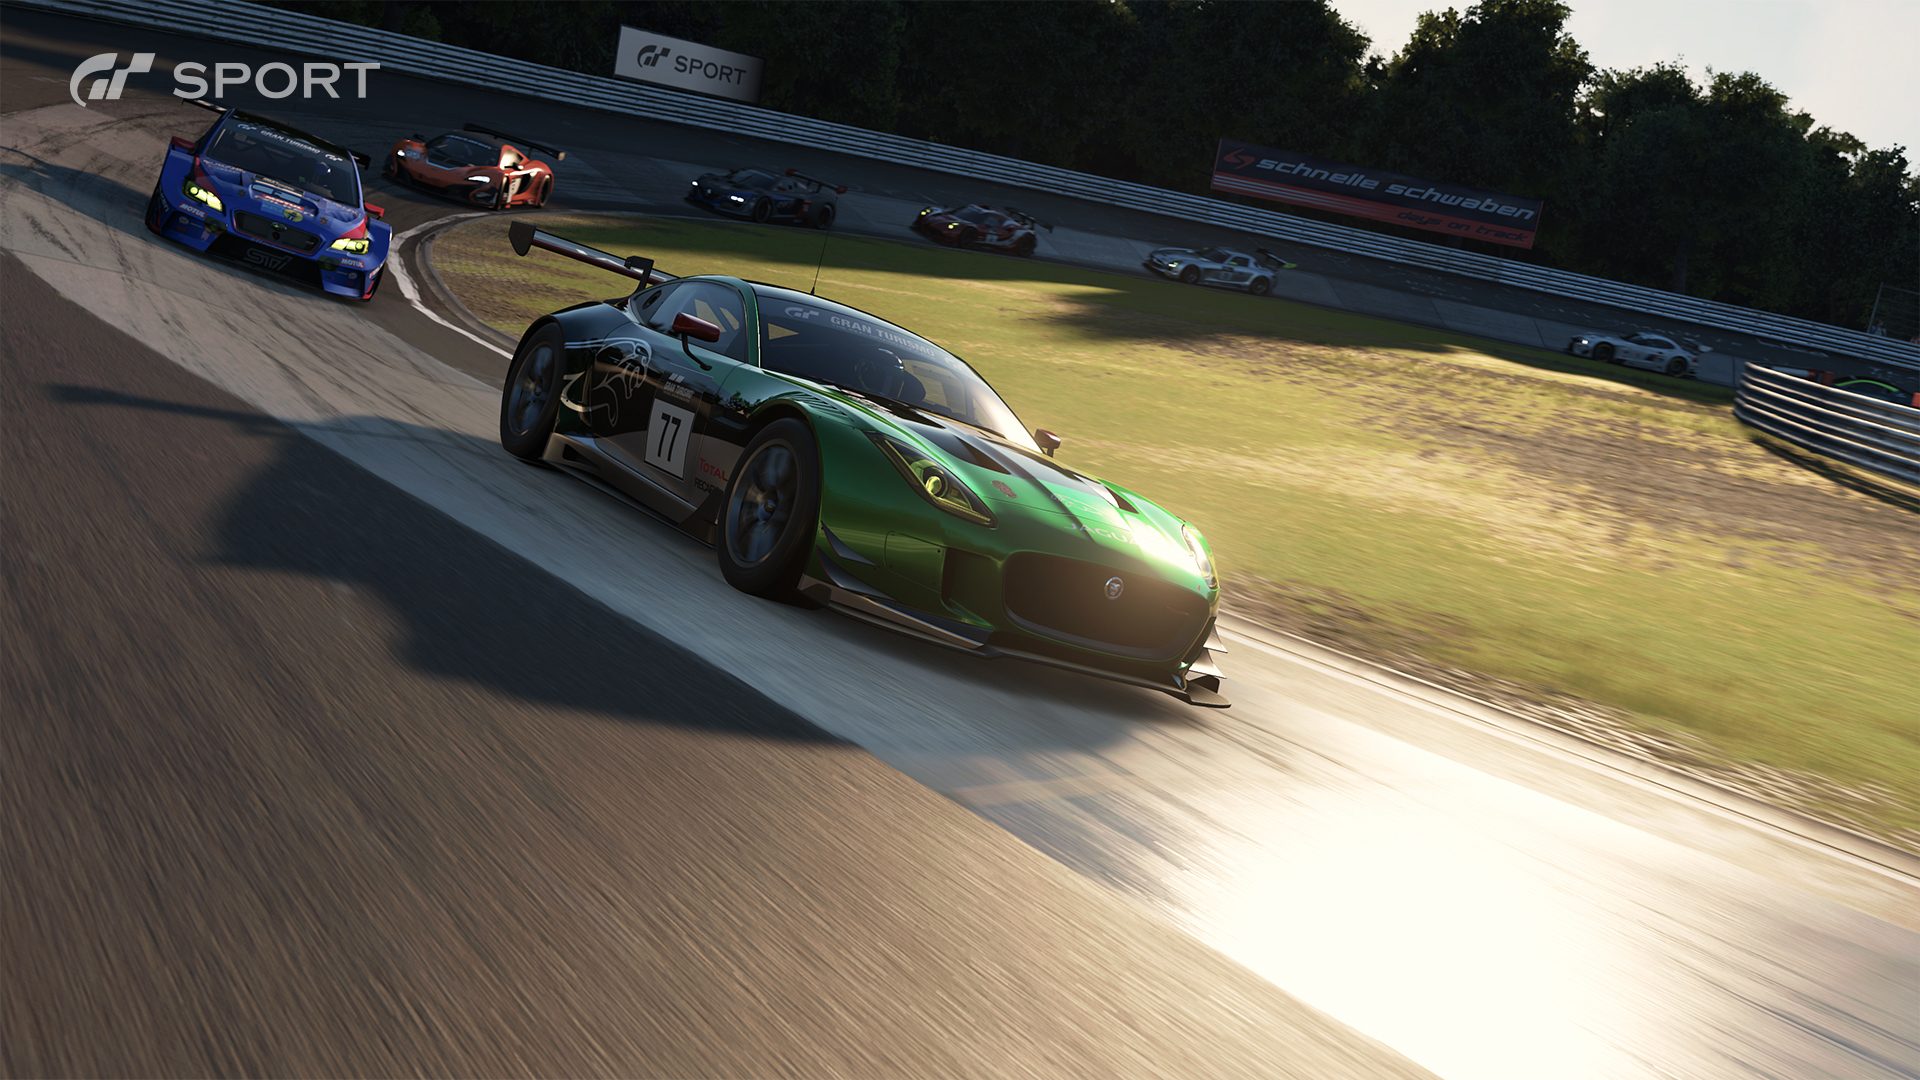 Gran Turismo 7 Review: The Iconic Franchise Is Good On PS4, Mind